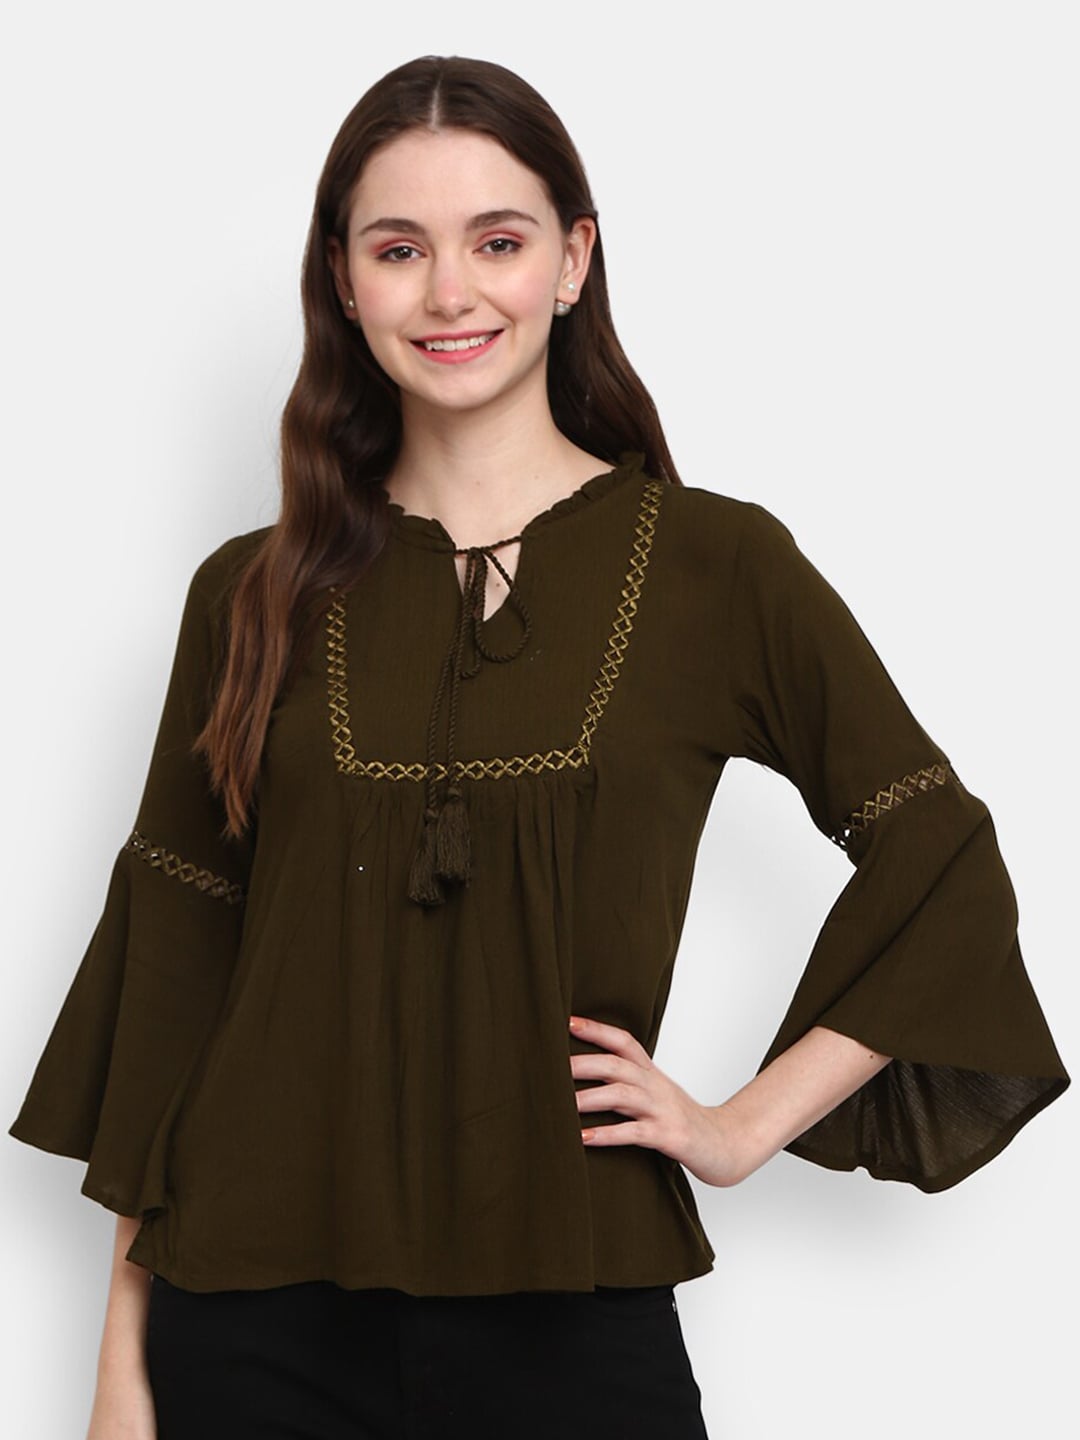 V-Mart Olive Green Tie-Up Neck Chiffon Top Price in India